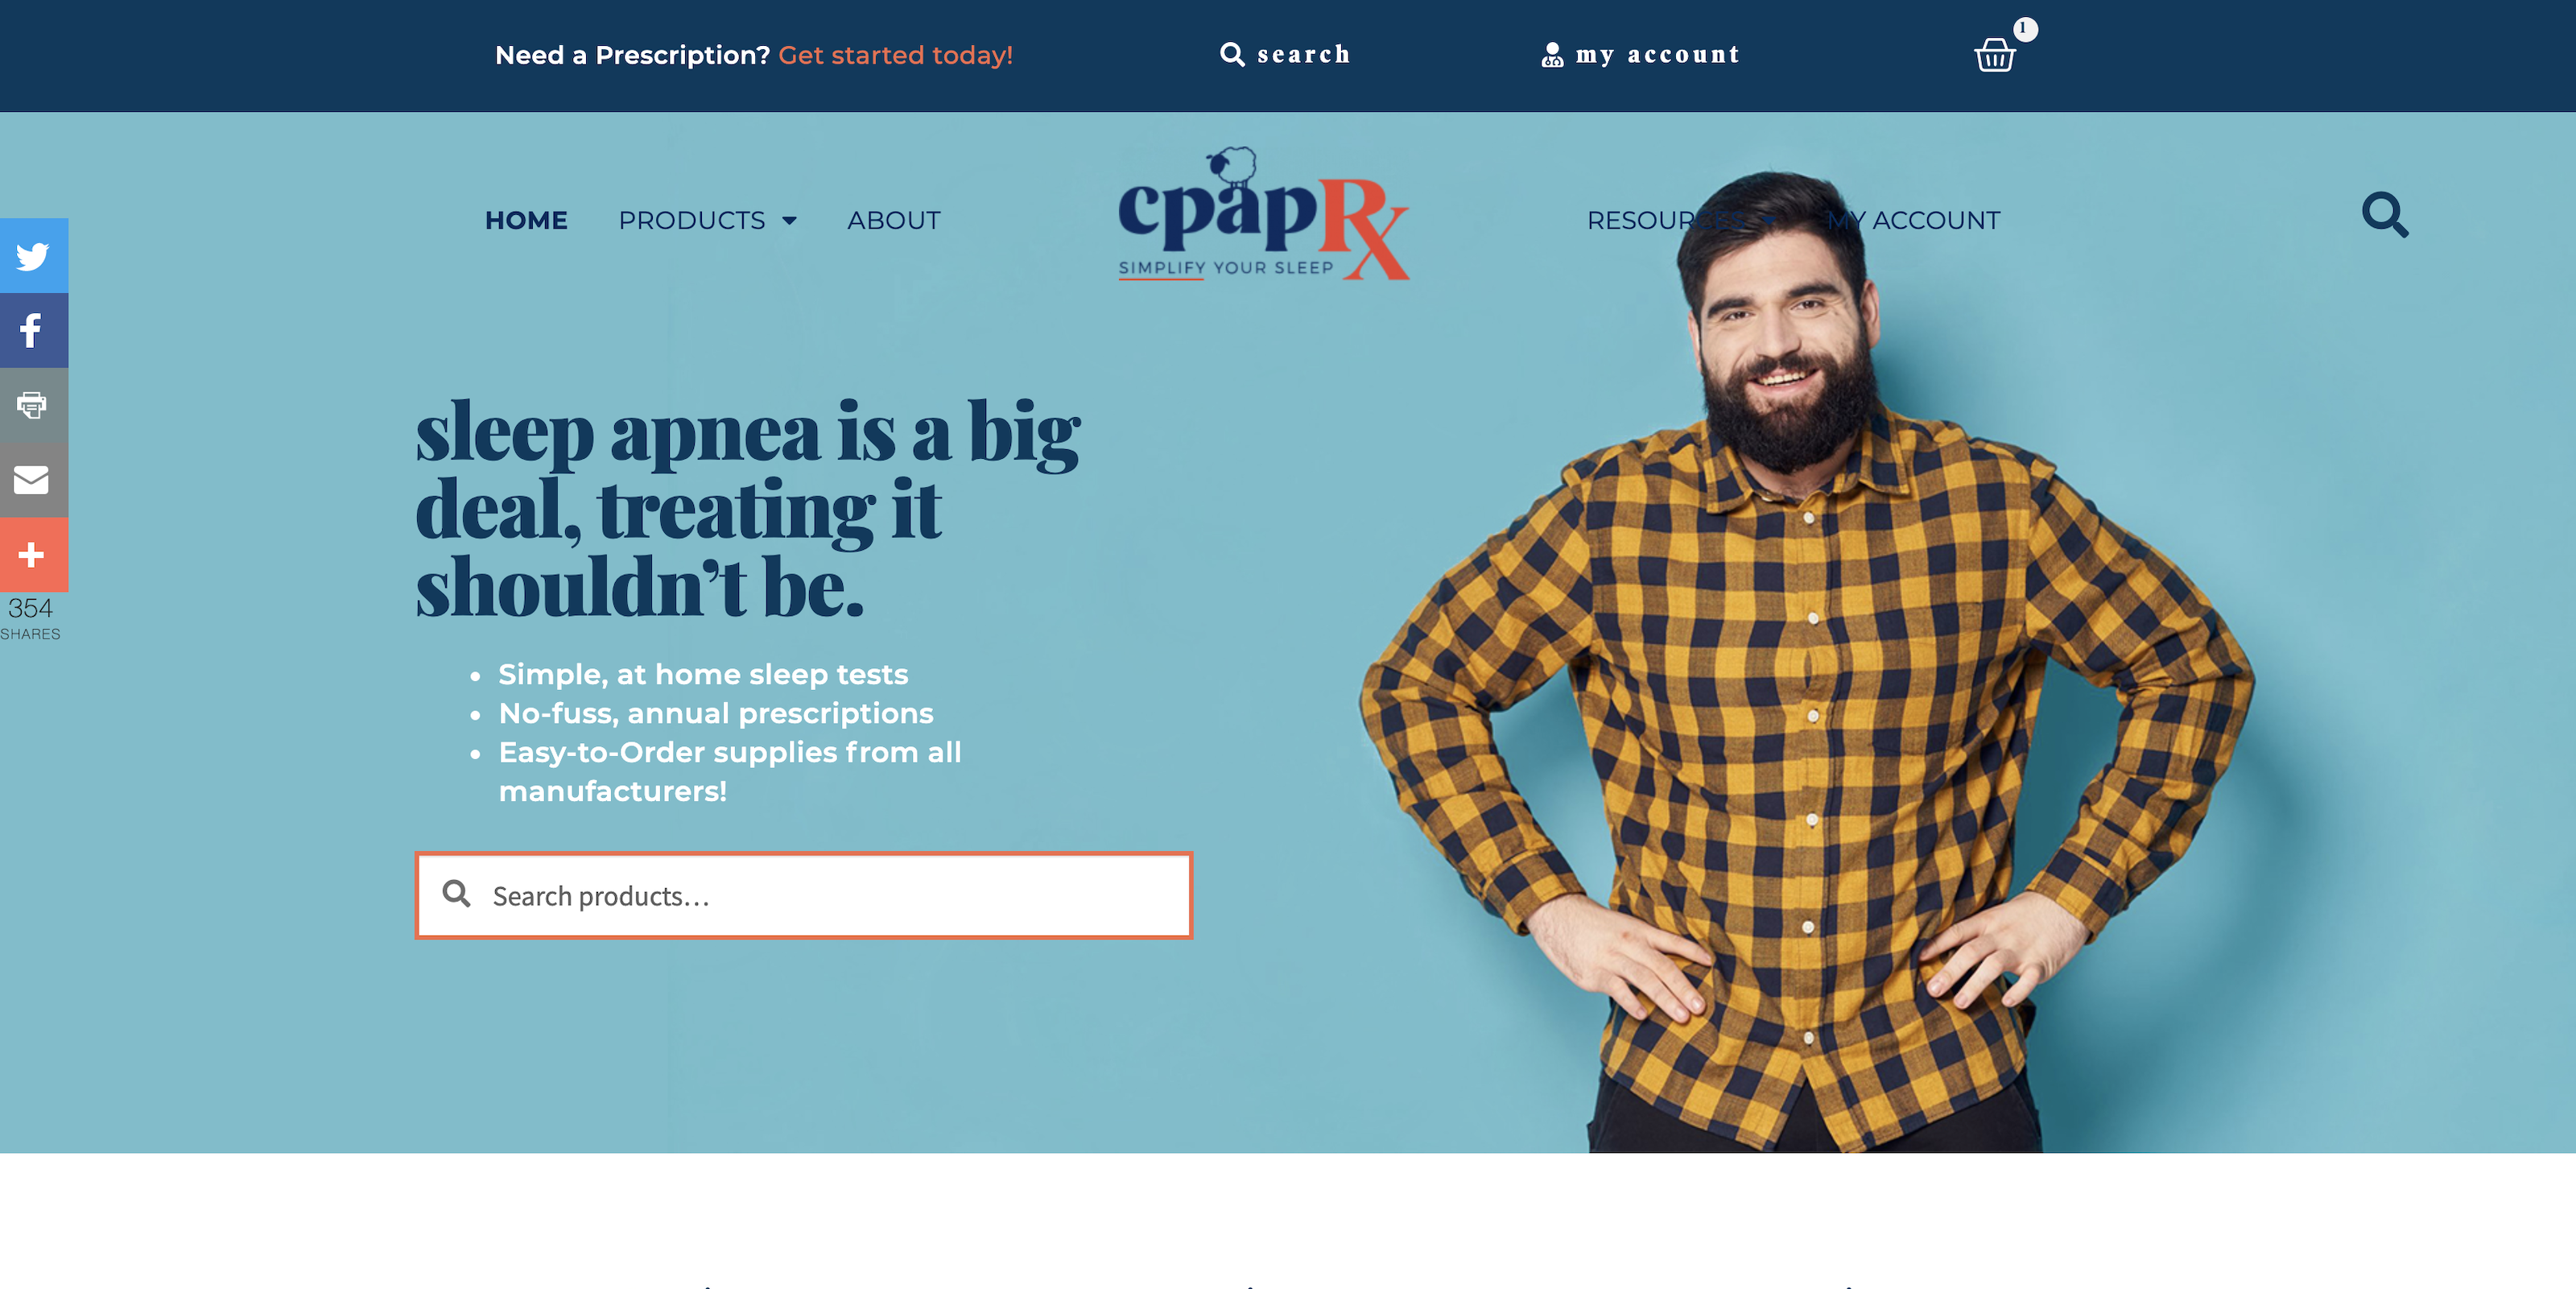 Patients can purchase at-home sleep tests, CPAP prescriptions, and CPAP supplies online at new cpapRX website